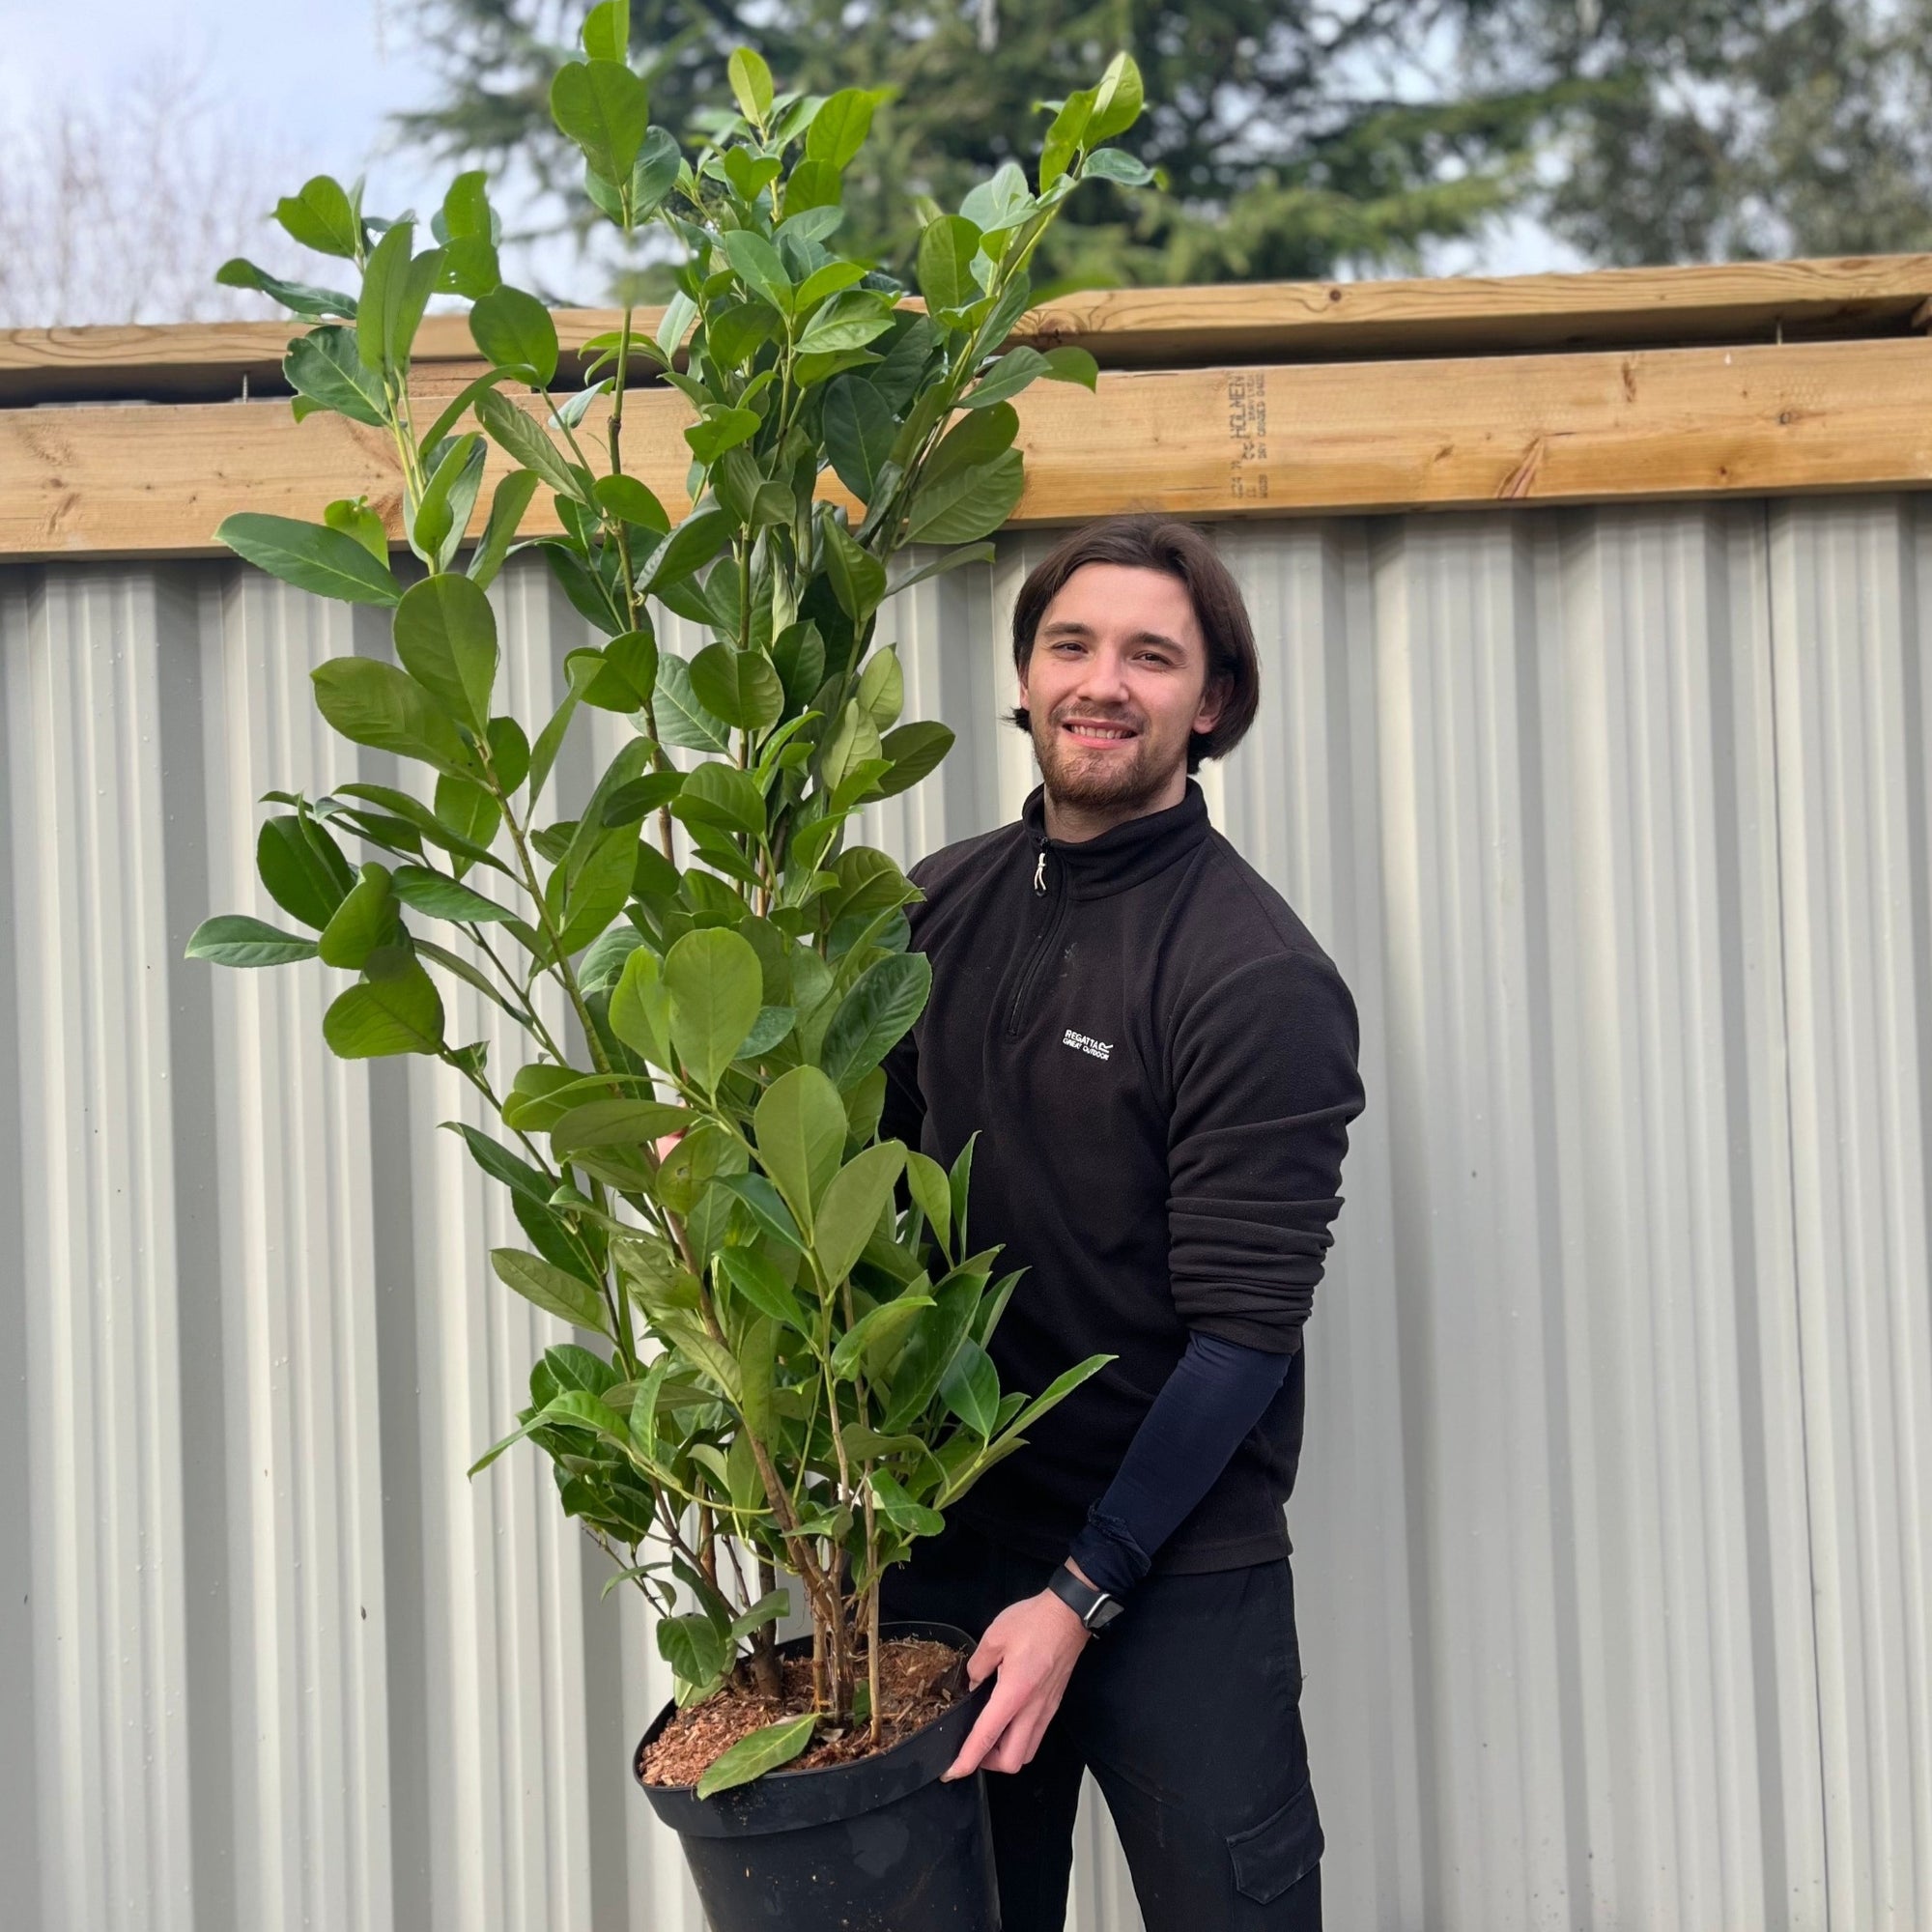 5ft (130-150cm) Potted Cherry Laurel Hedge Plants (Multi-Buy Offers Available)